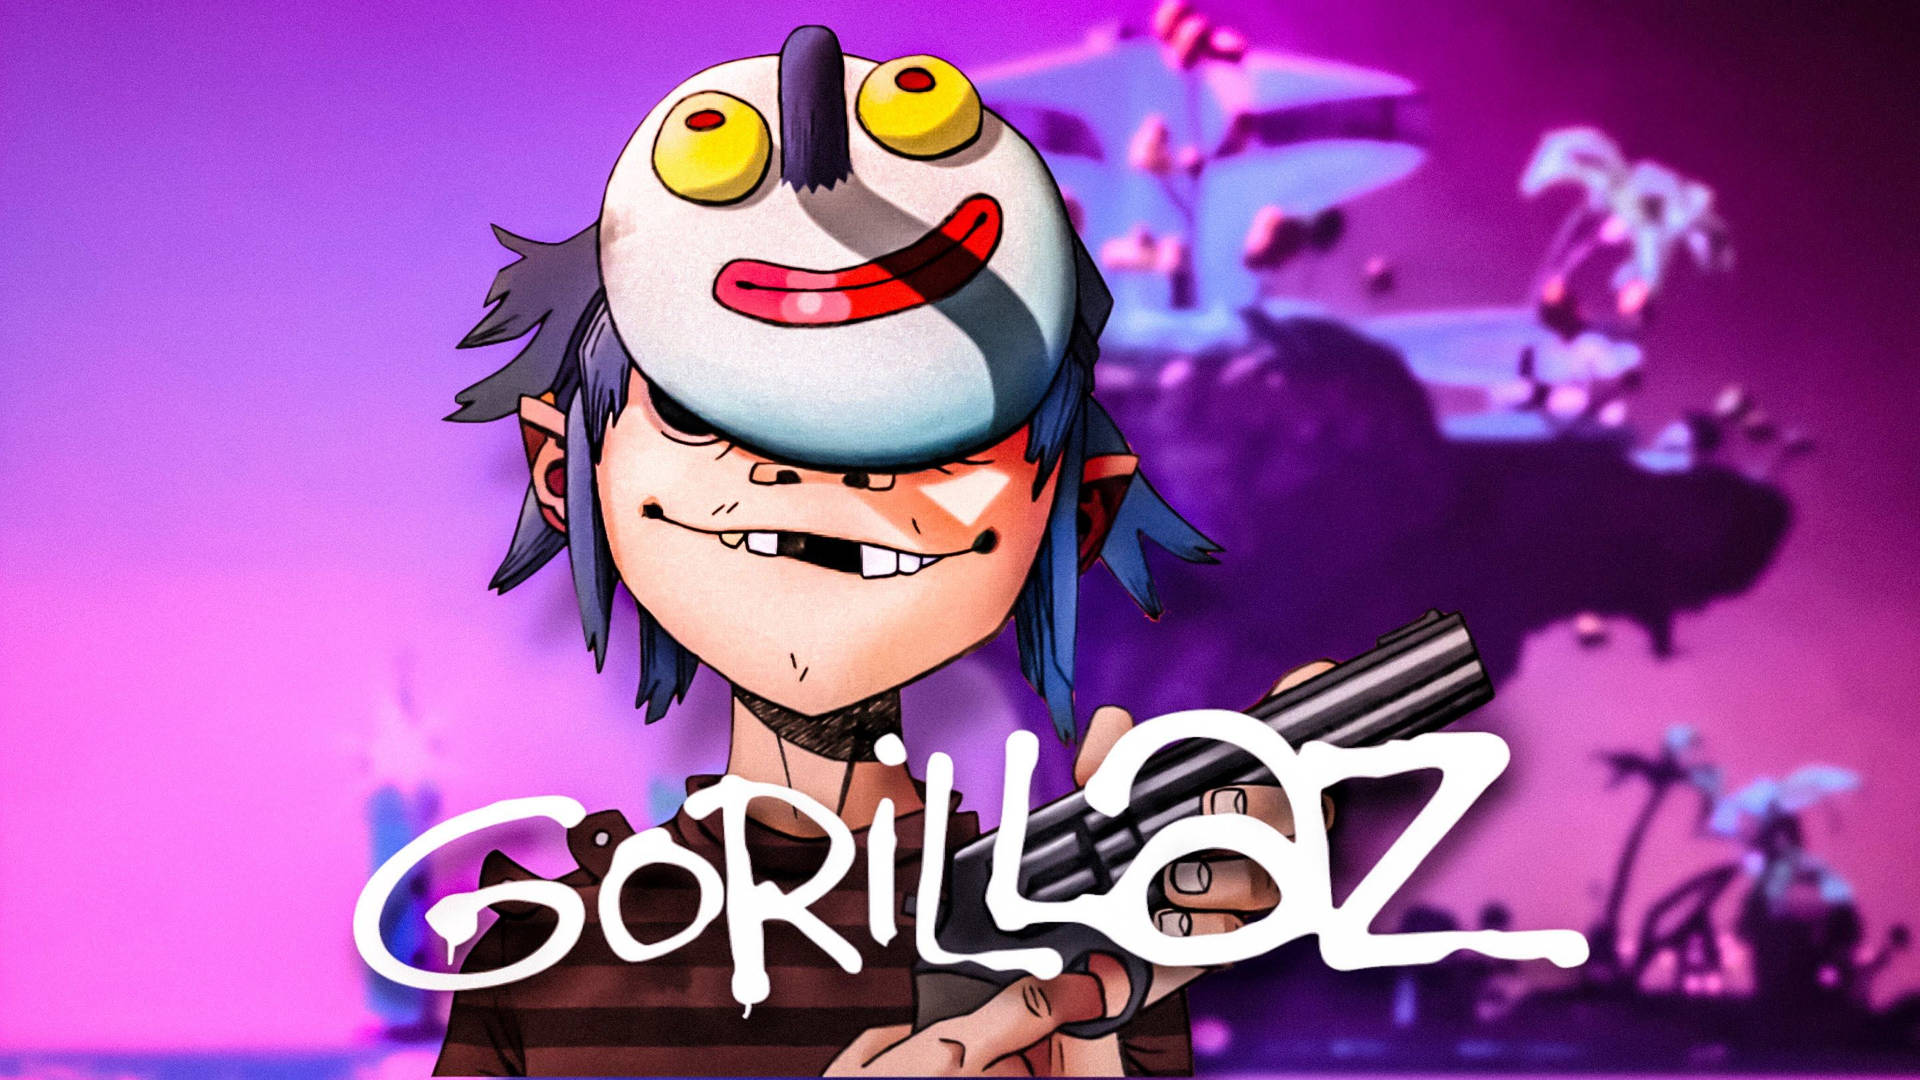 Feel Good Inc. with 2D and the Stylo Mask. Wallpaper